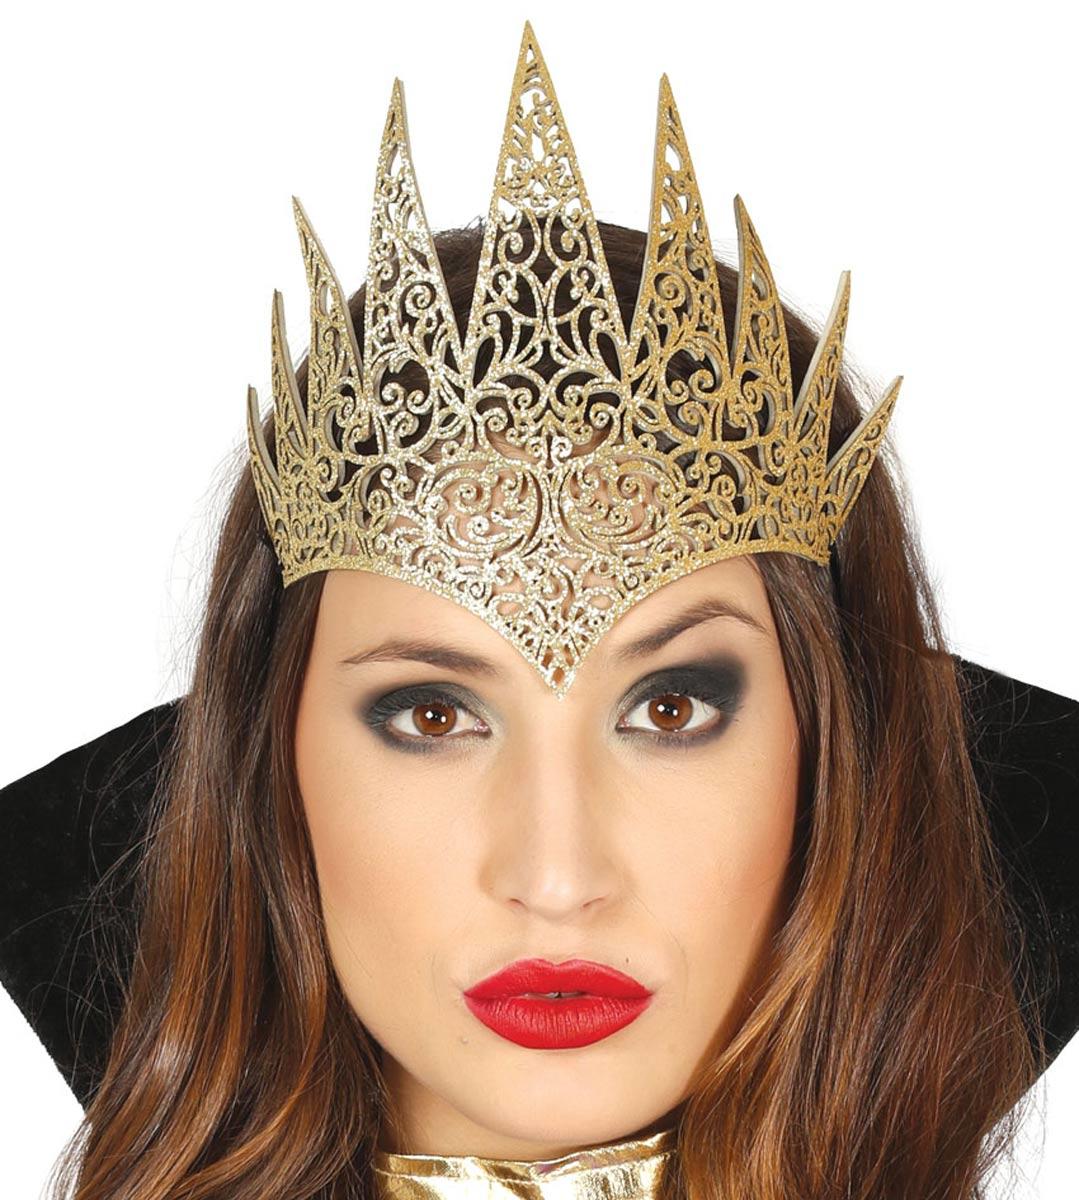 Game of Thrones, Evil Queen and Frozen Princess Golden Queen Tiara by Guirca 17411 available here at Karnival Costumes online party shop